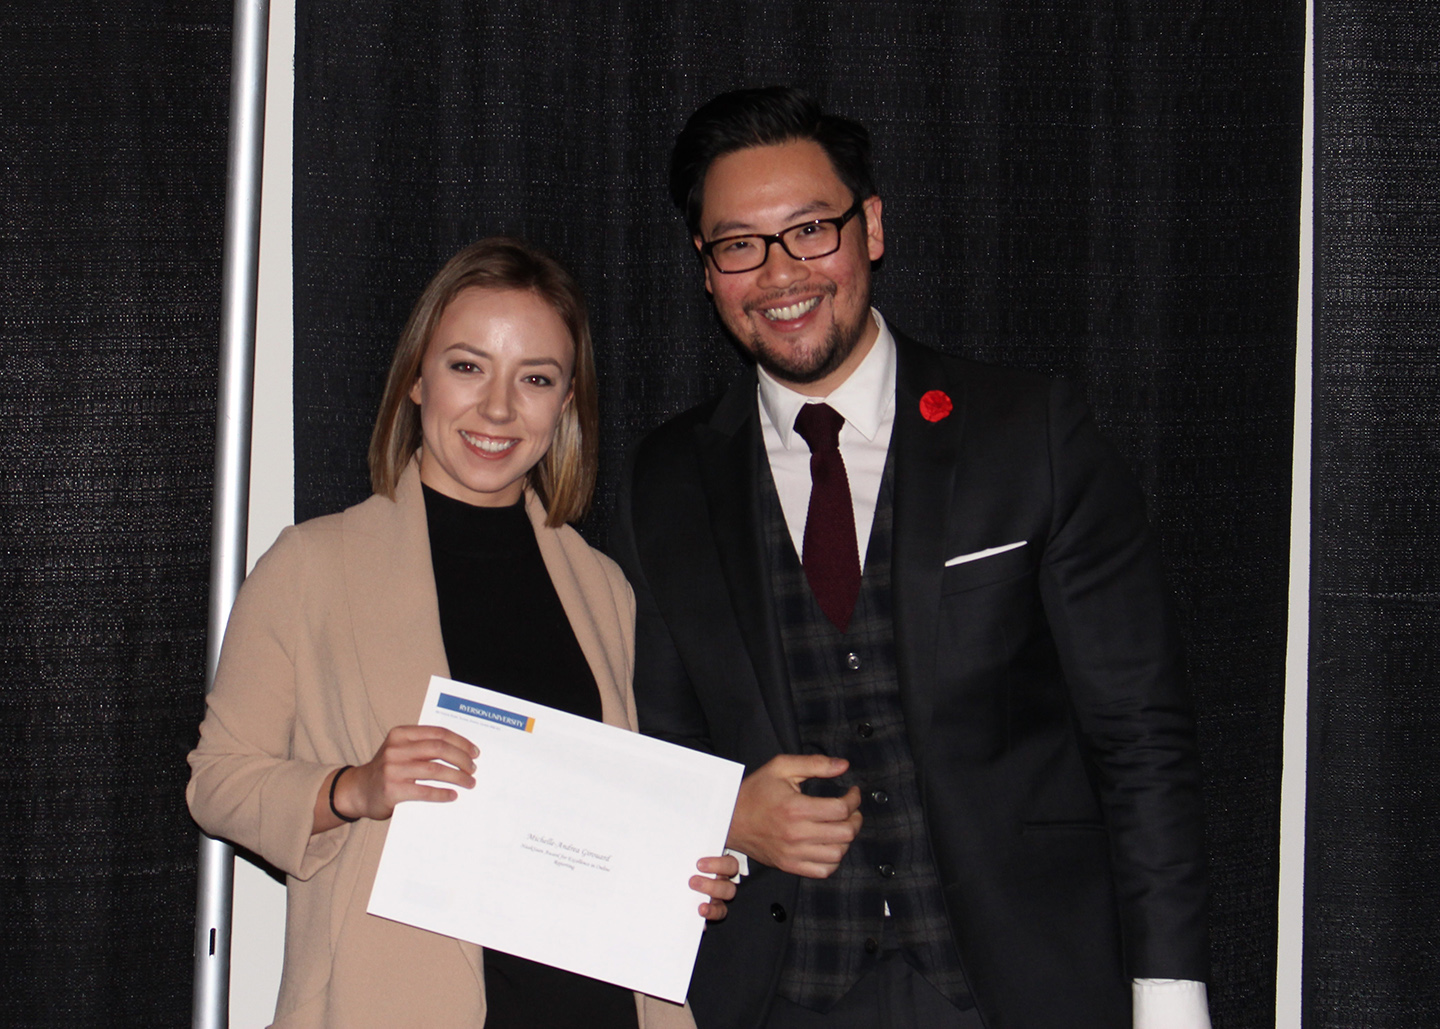 2015 winner Michelle-Andrea Girouard with Awards committee member Adrian Ma.